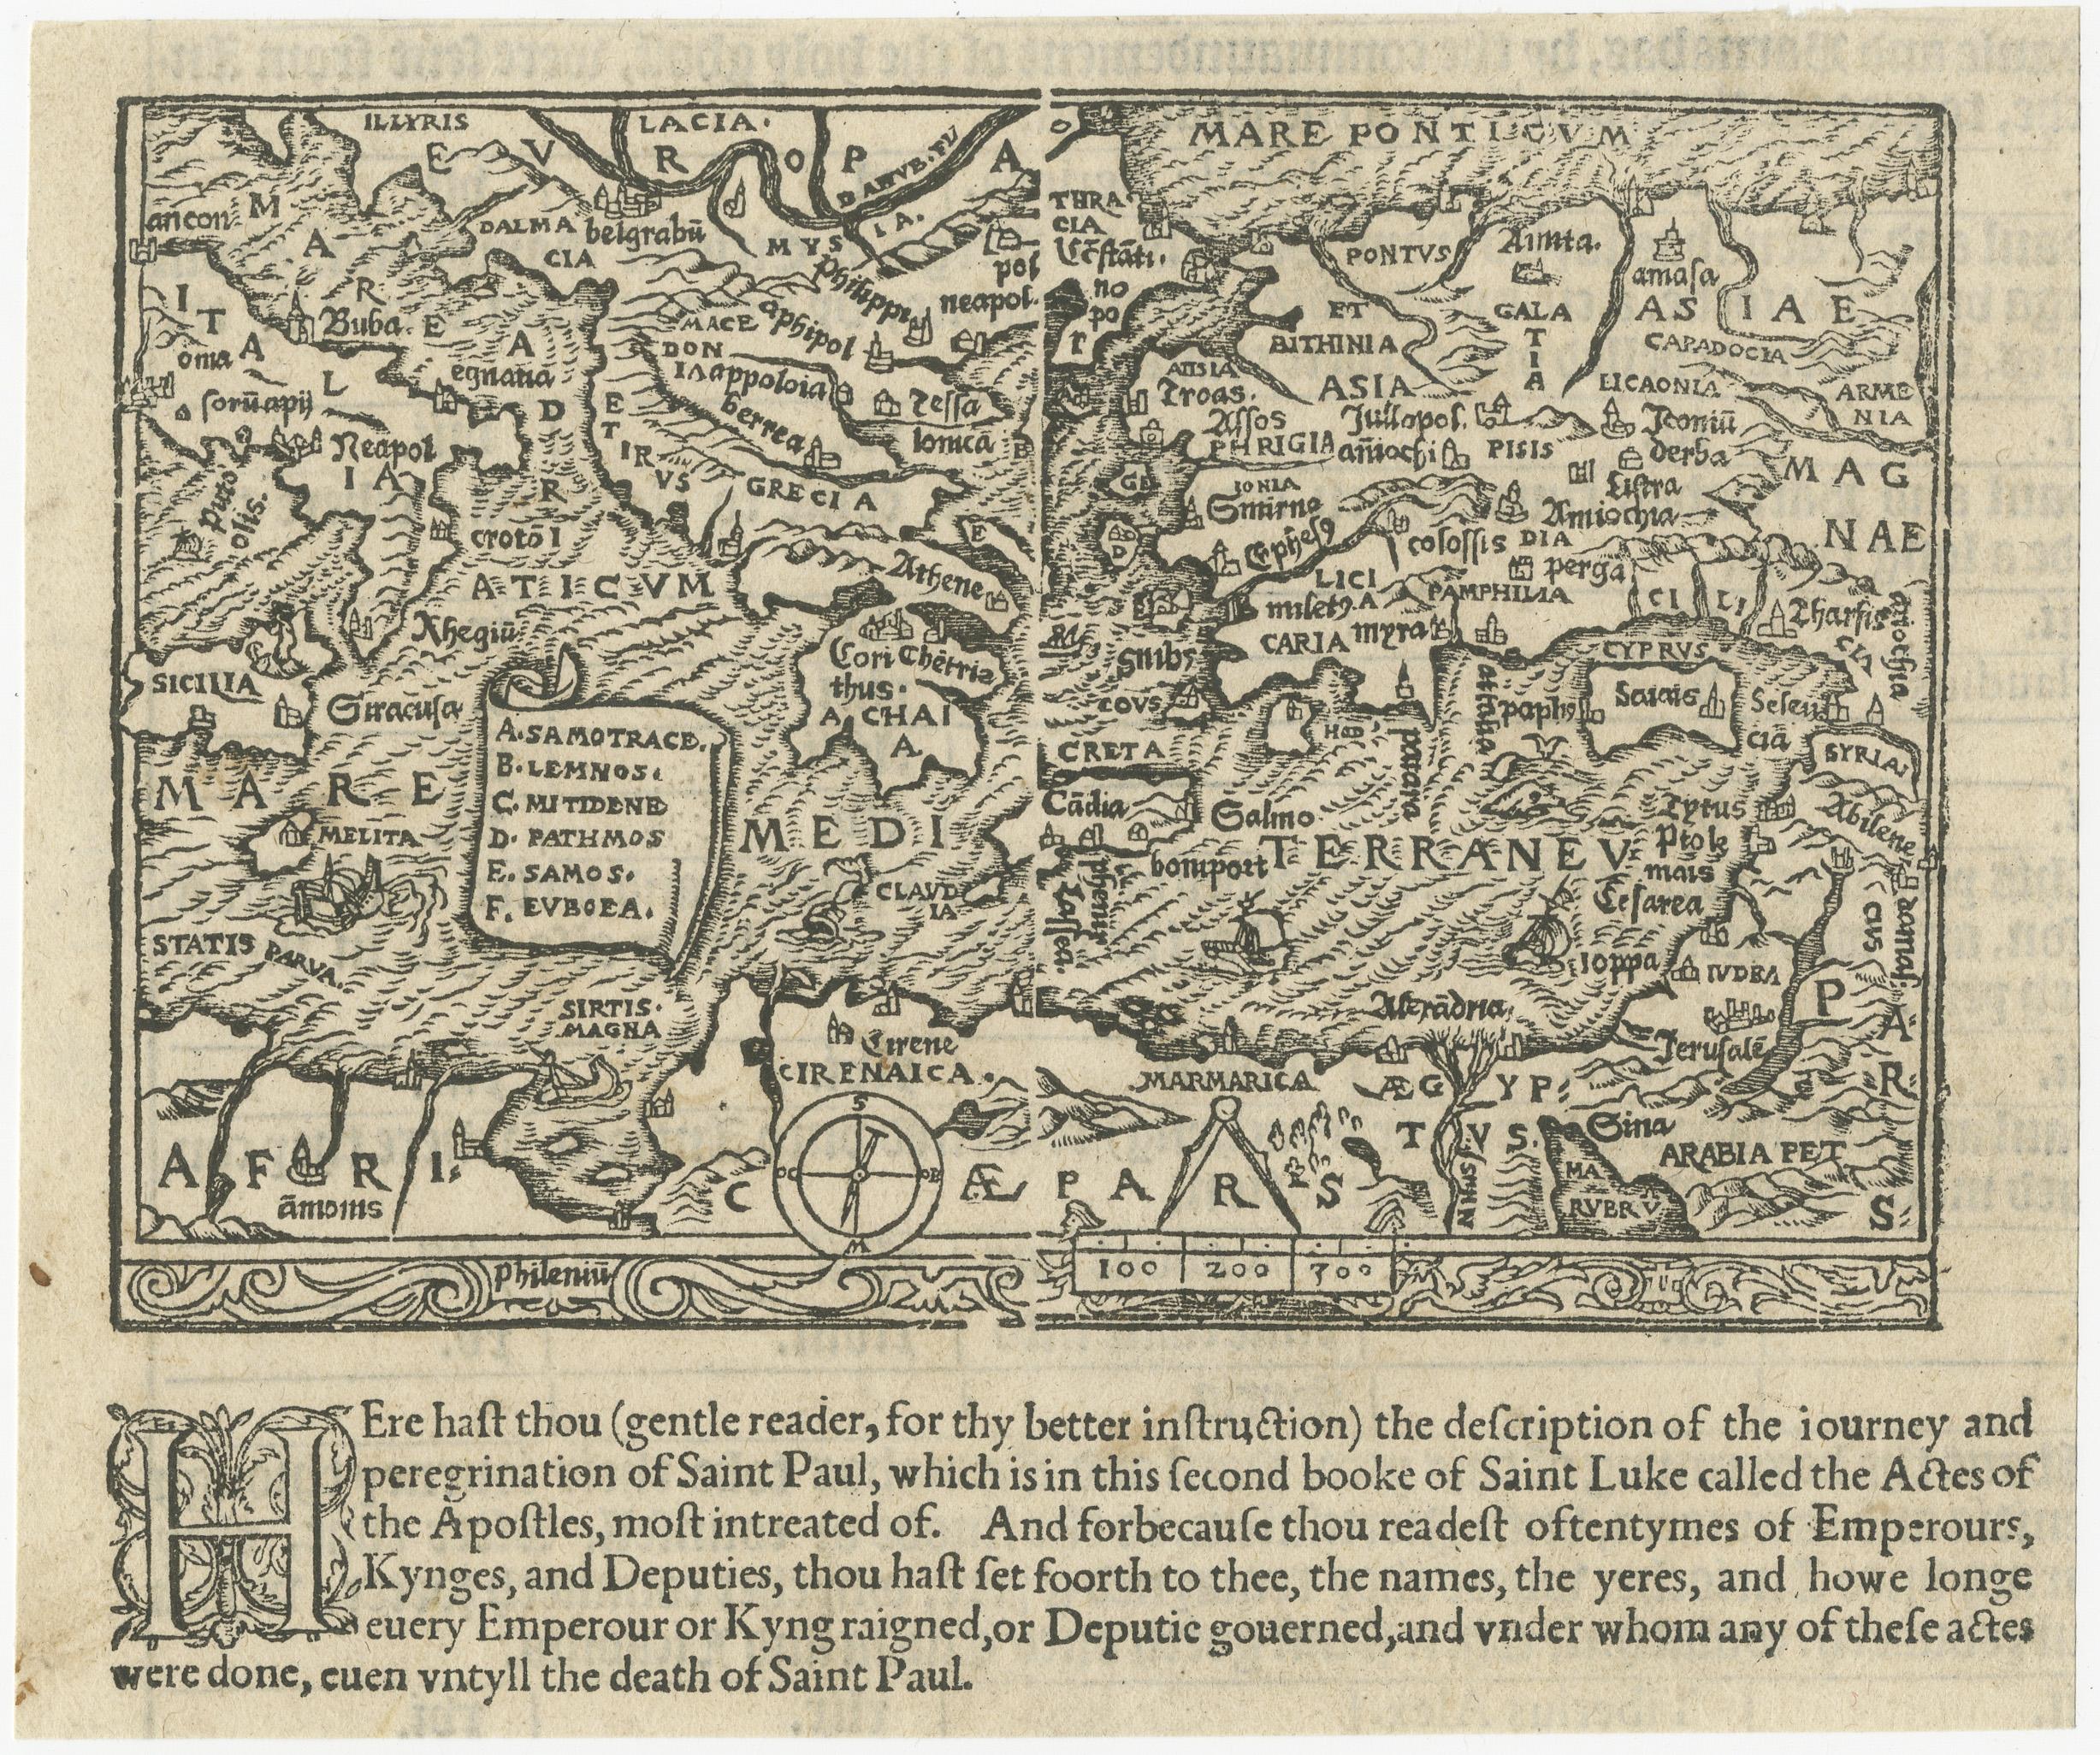 Very rare untitled antique woodcut map showing the region of the missionary journeys of Apostle Paul. It shows the Mediterranean with Greece, Asia Minor (Turkey), Northern Africa, Southern Italy and surroundings. With small legend including six